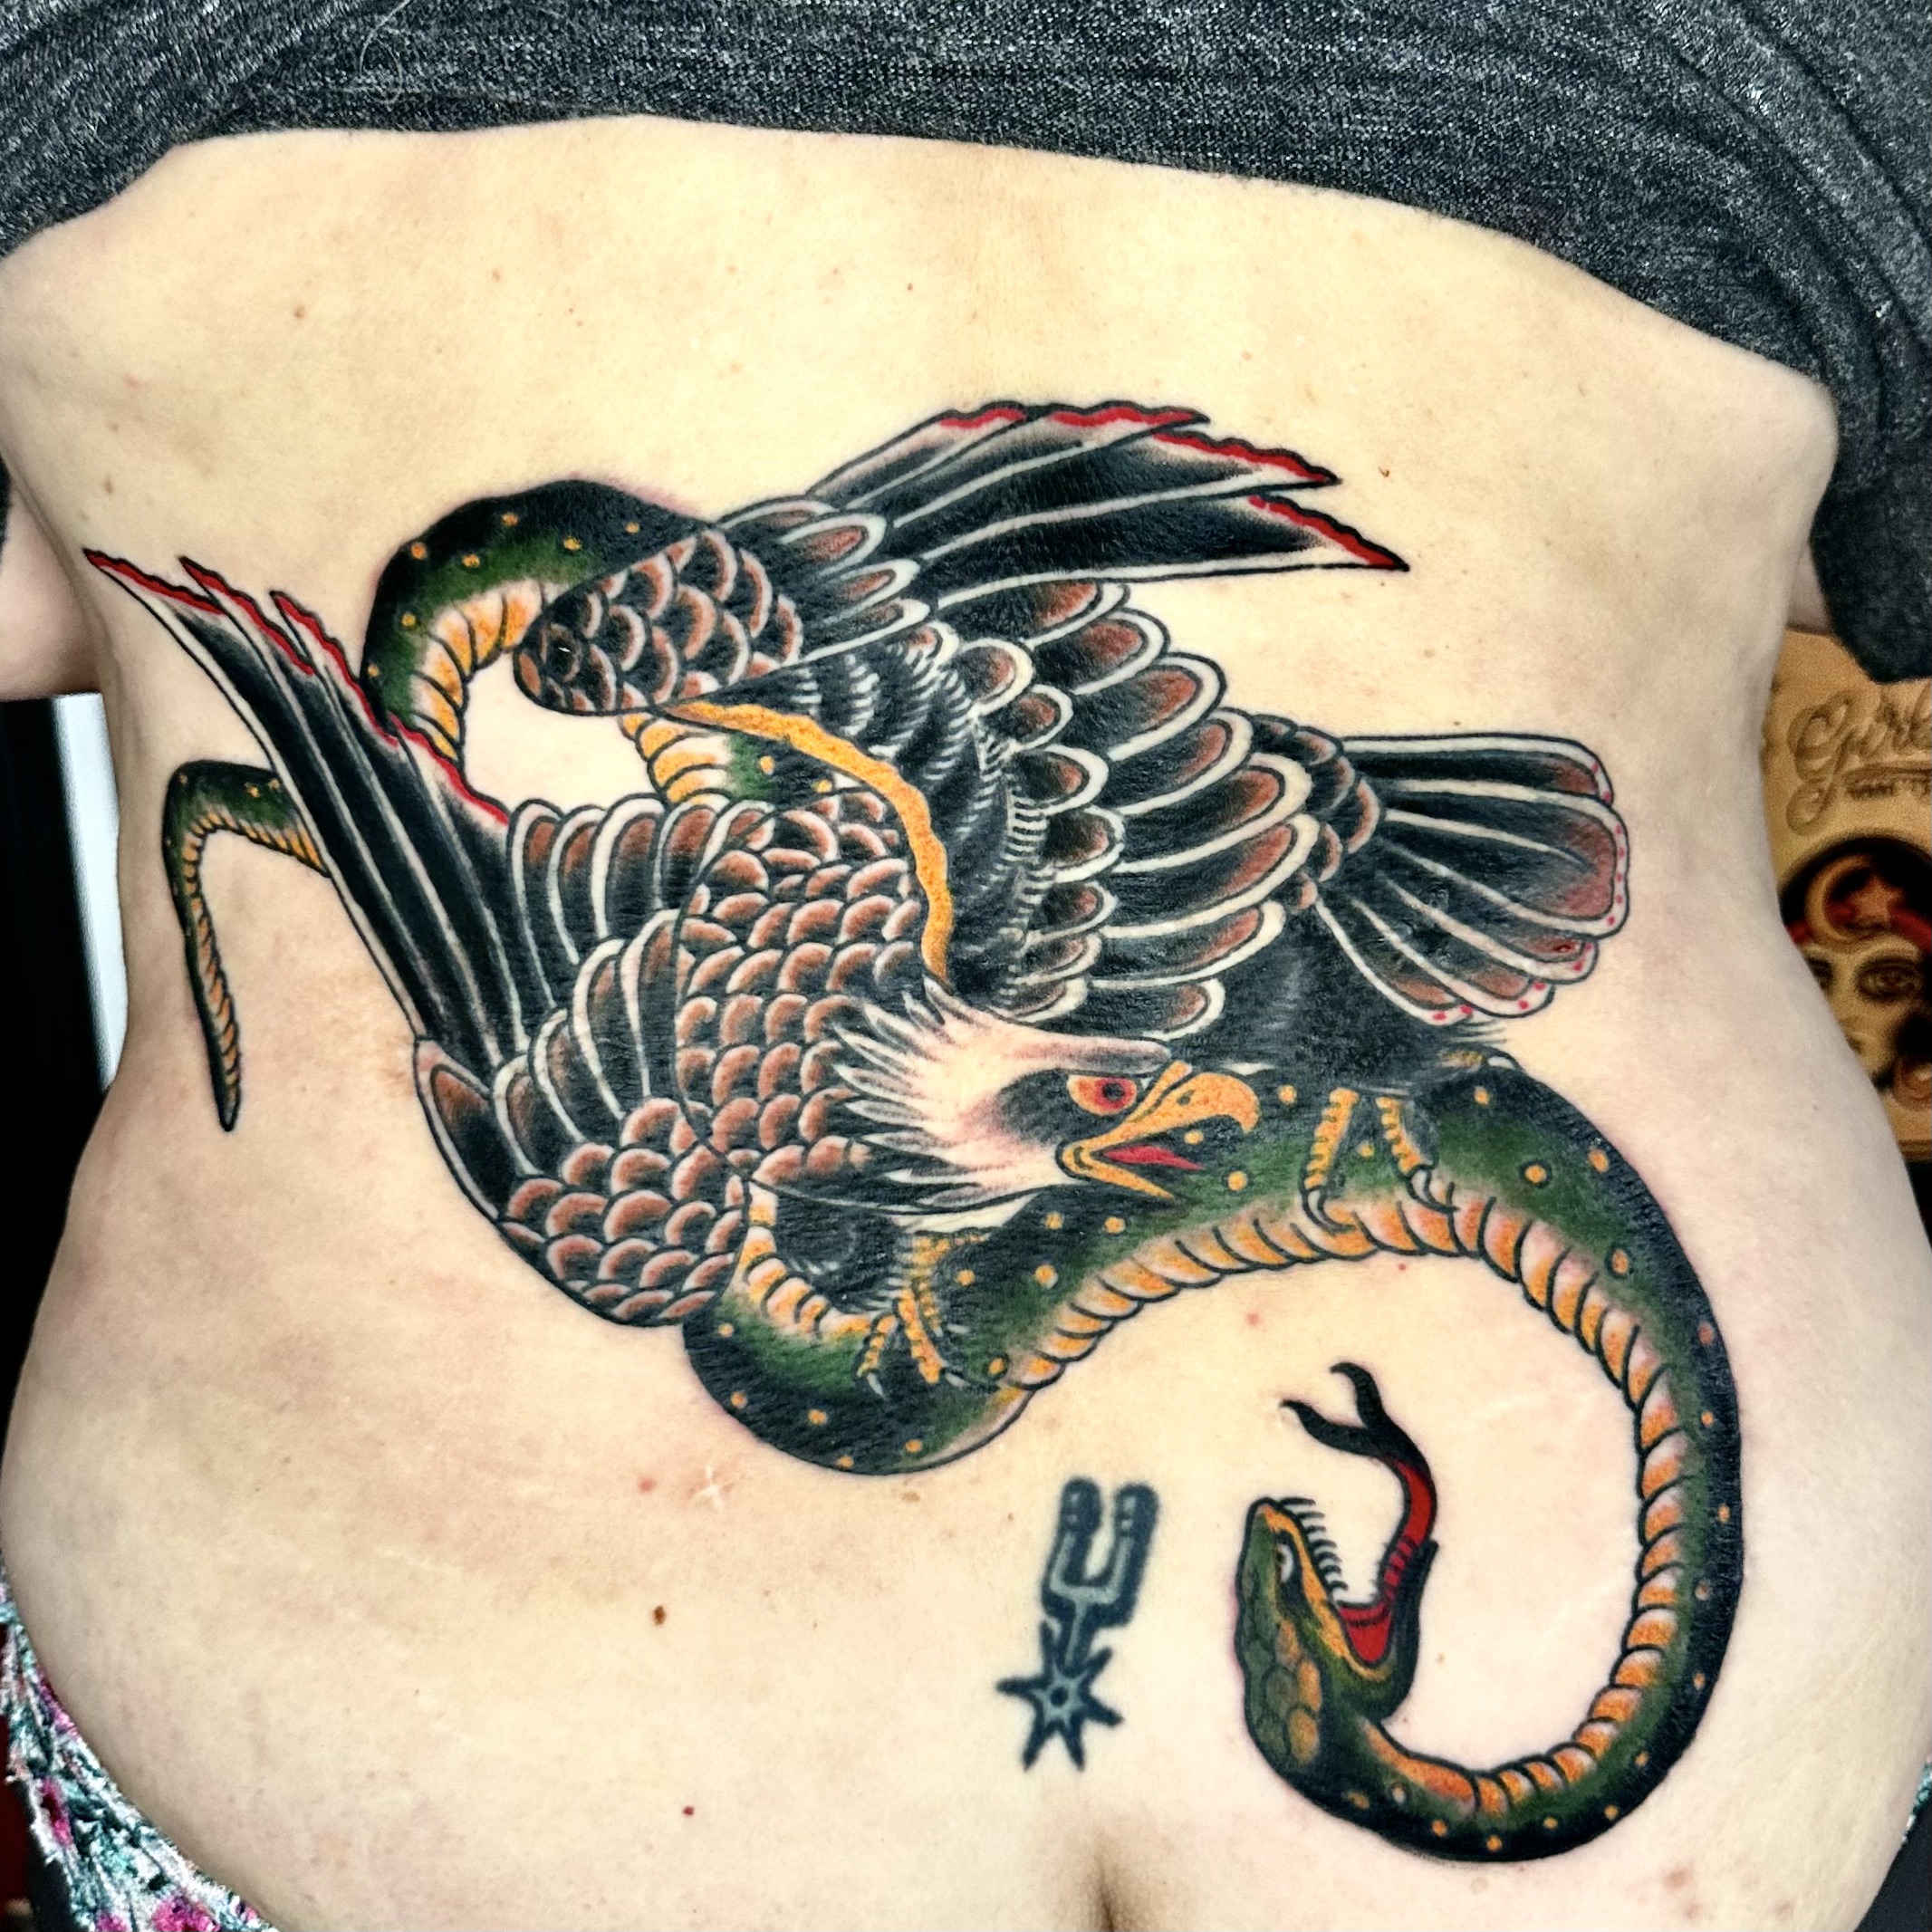 Tattoo of a snake and an eagle from Dallas tattoo shop